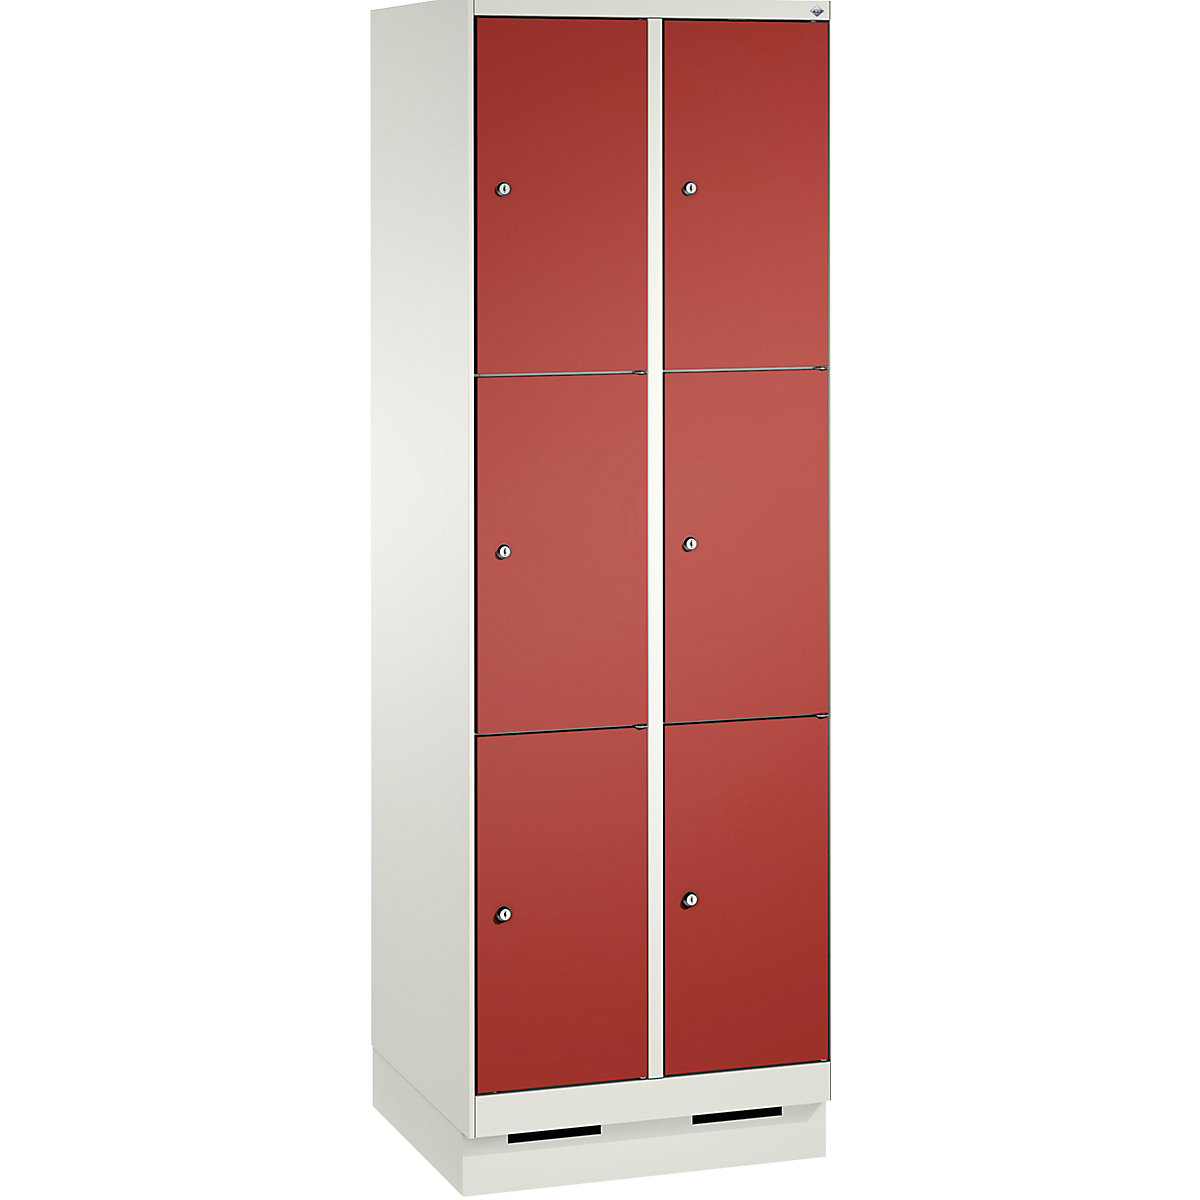 EVOLO locker unit, with plinth – C+P, 2 compartments, 3 shelf compartments each, compartment width 300 mm, traffic white / flame red-7